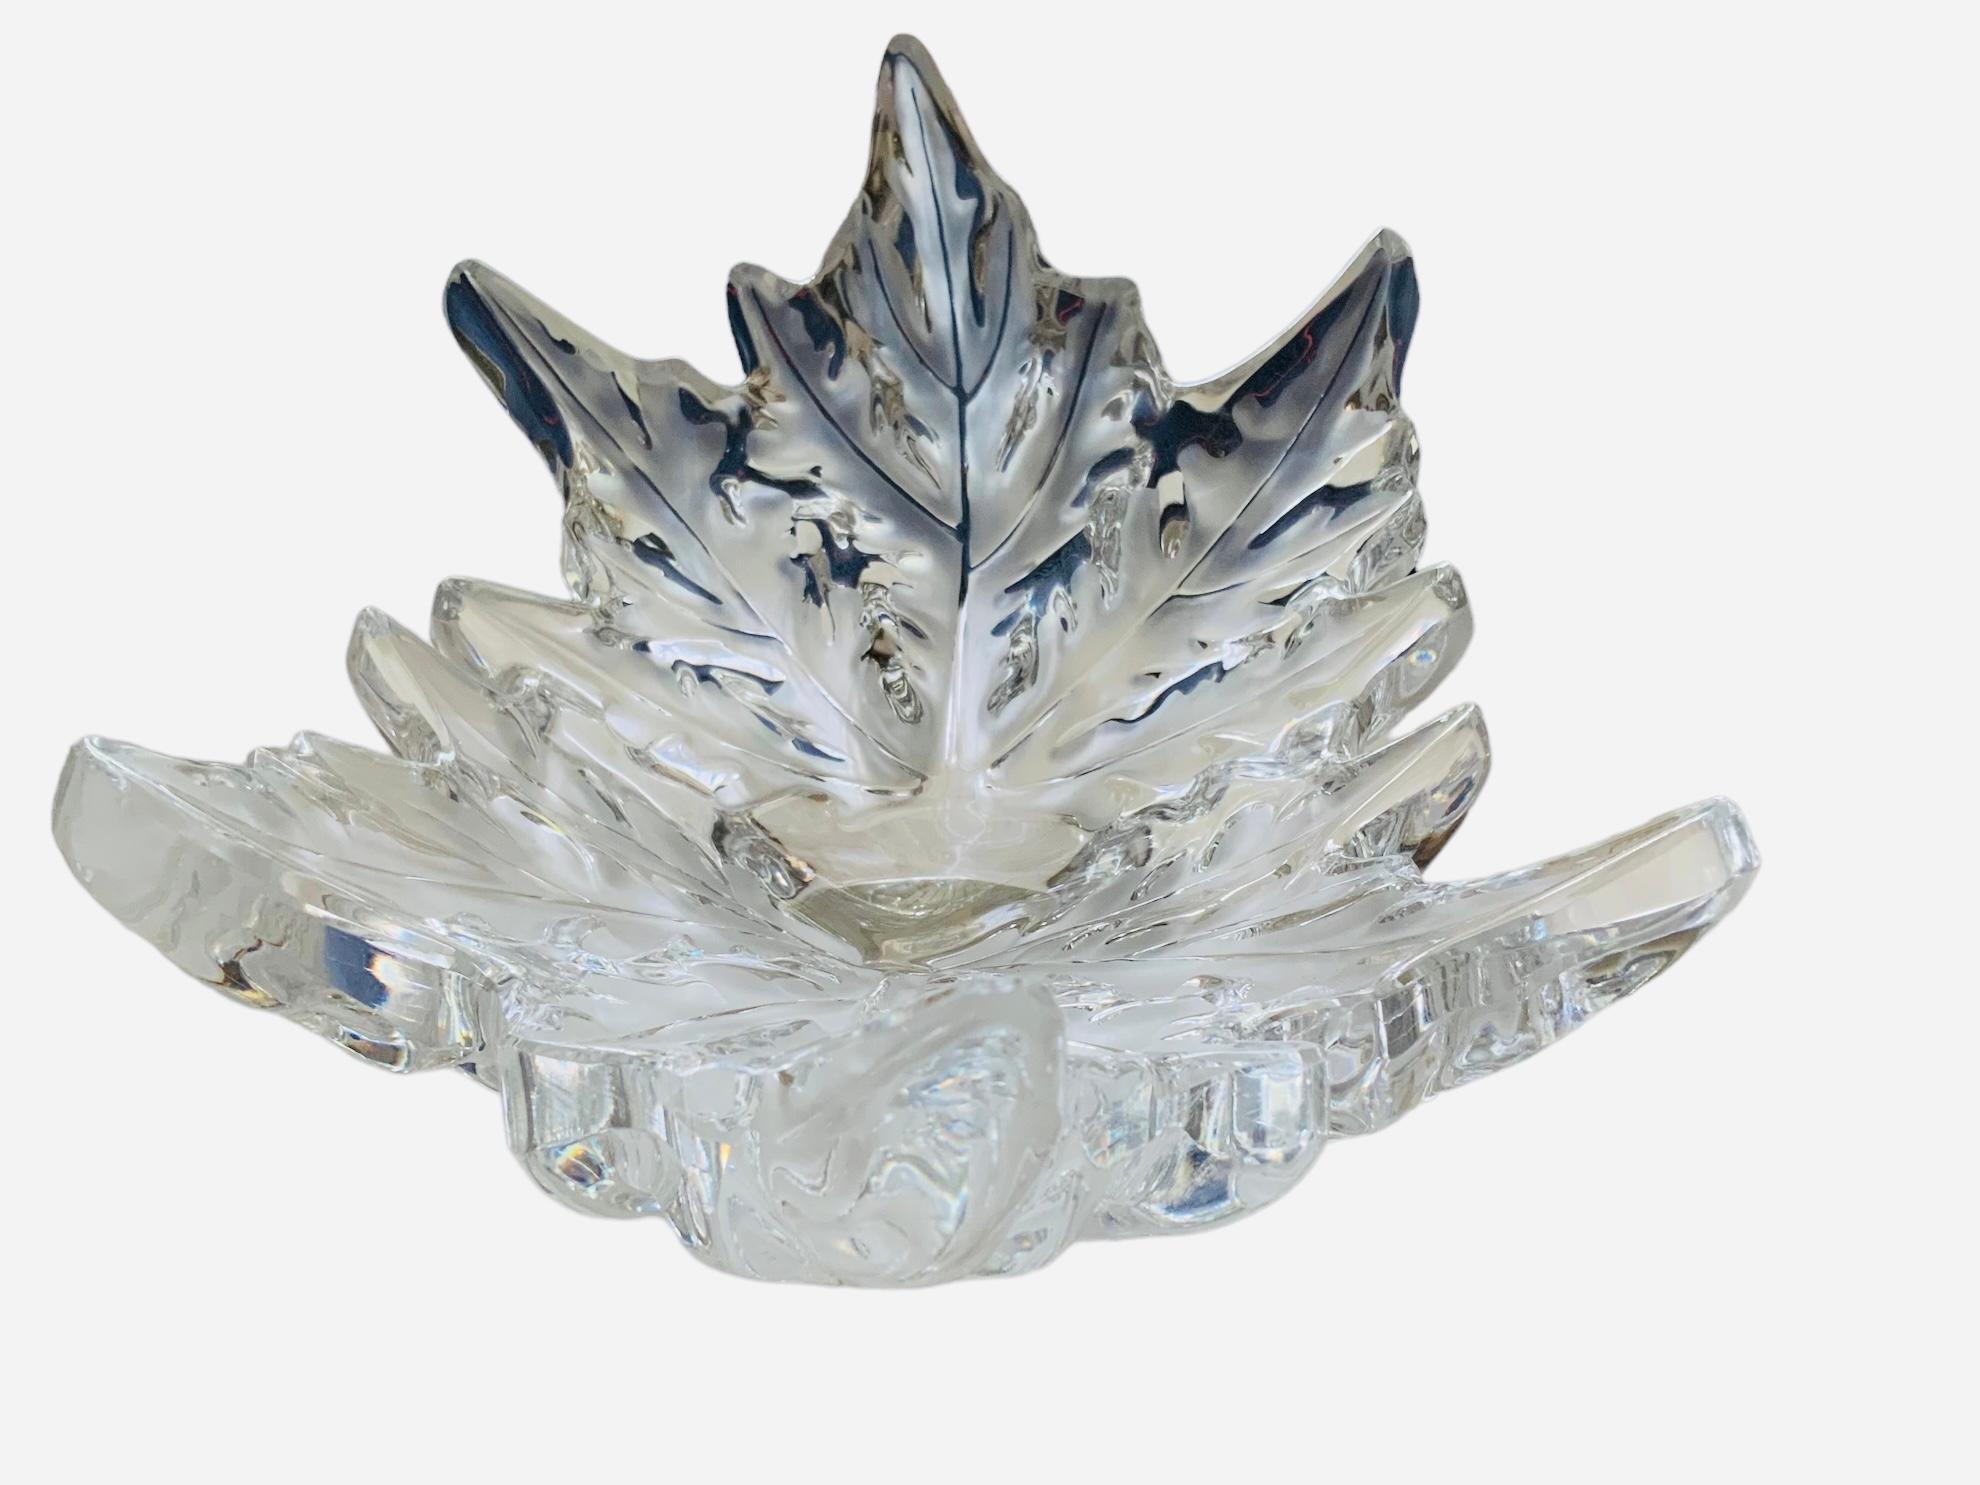 This is a Lalique Crystal Champs- Elysses medium size oval bowl vase. It depicts multiple horse chestnut leaves arranged around a circular center base. Below the base, it is the acid etched Lalique circle R, France hallmark.